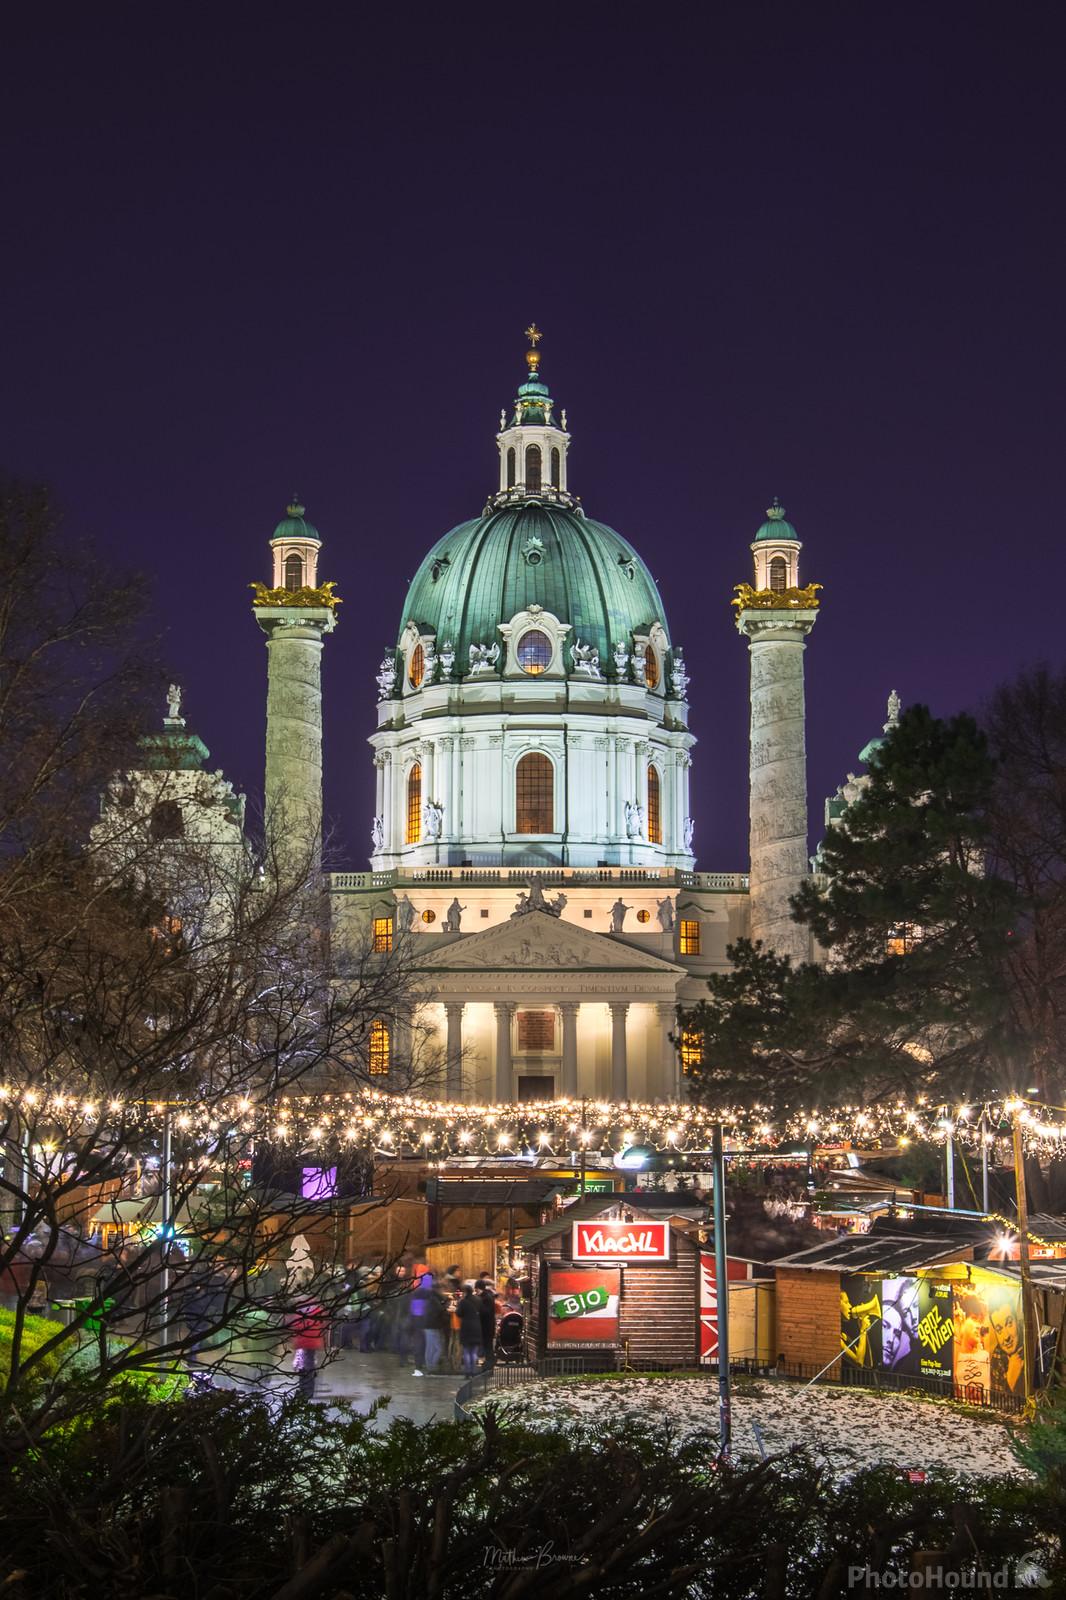 Image of Vienna Christmas Markets by Mathew Browne